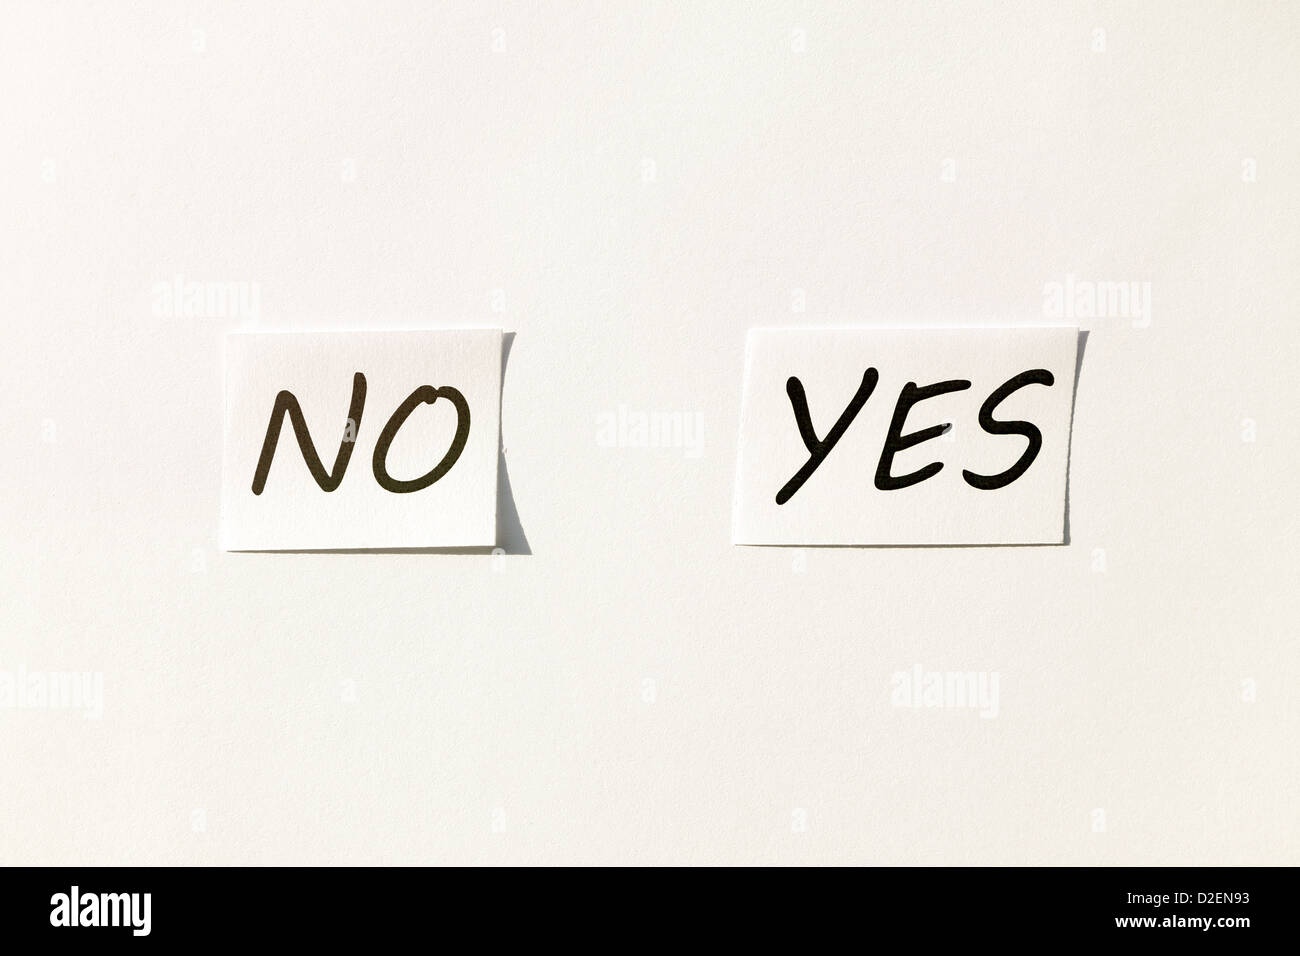 Just two pieces of paper with yes and no on it. Stock Photo